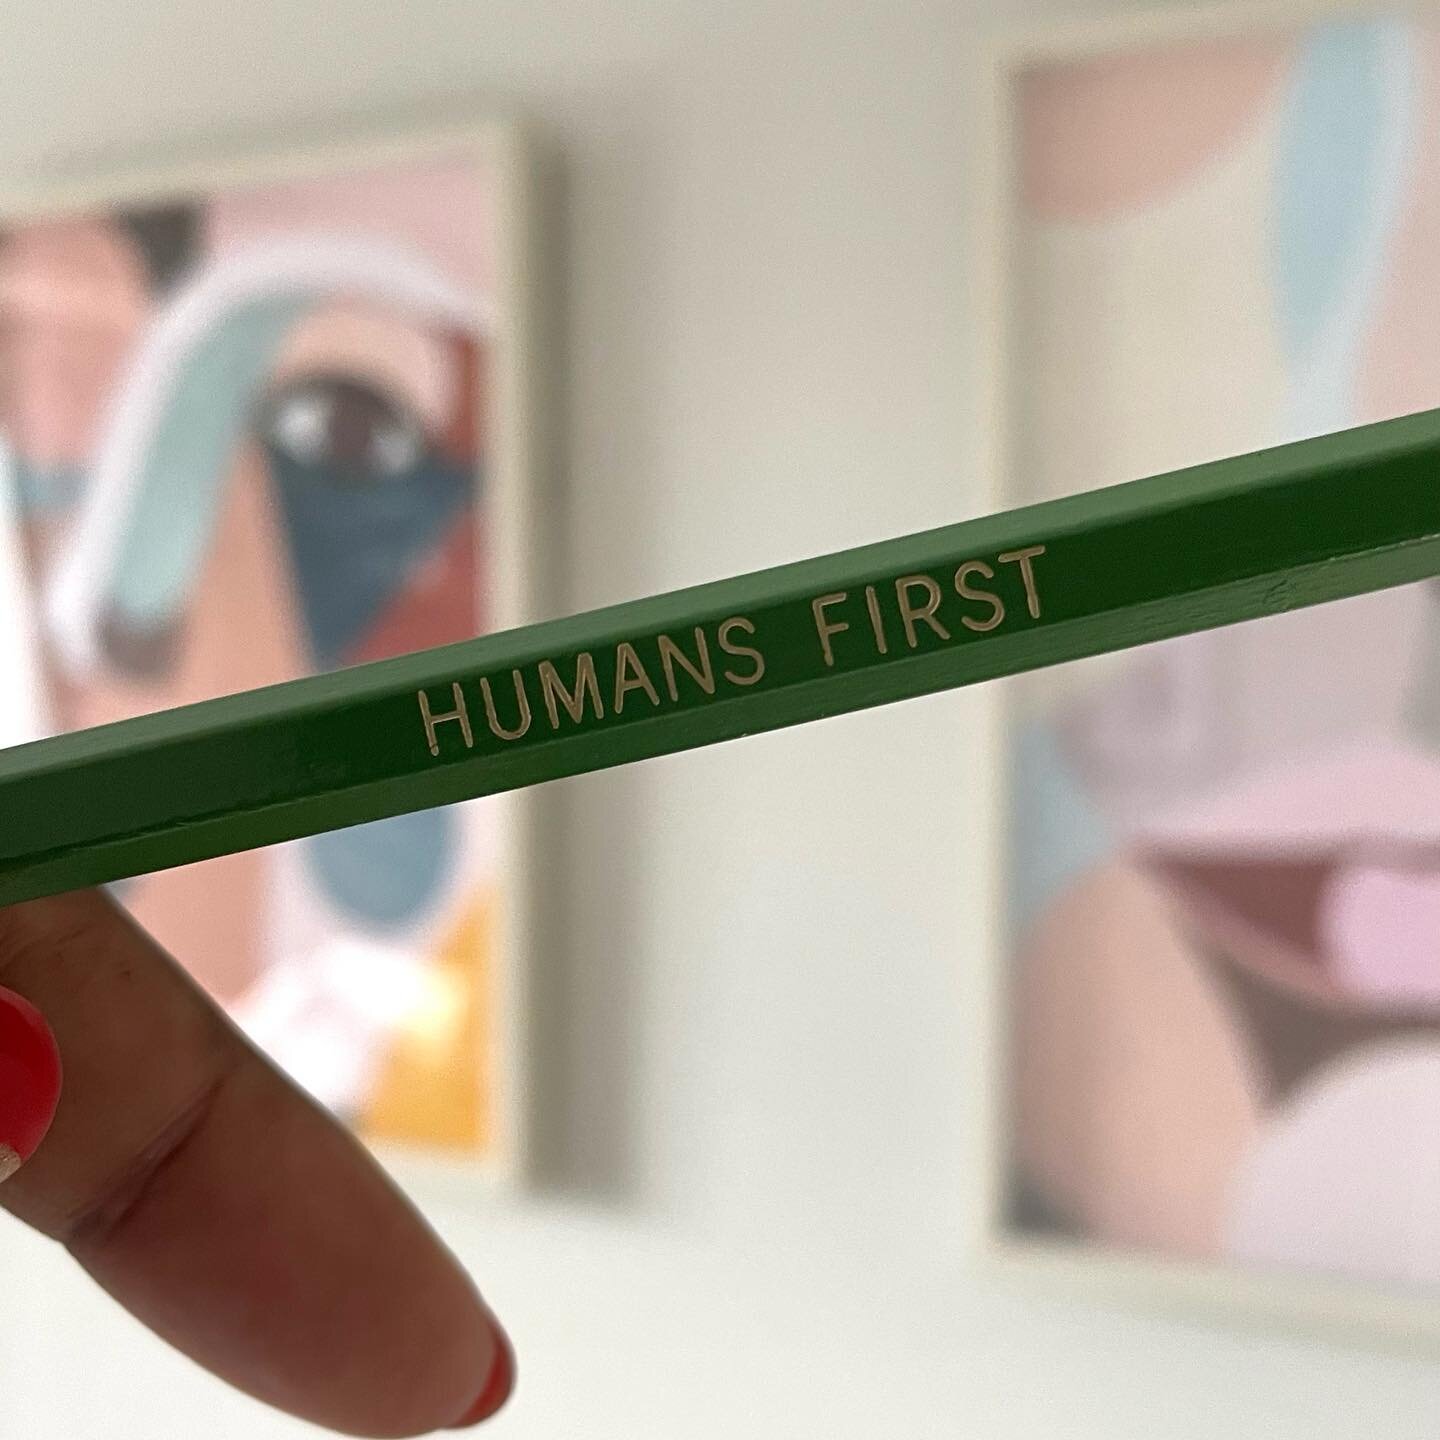 We&rsquo;re a little over 2 years old this month. Although I&rsquo;ve been doing this work for years, when I sat down to craft out KGC and file all the legal things, I wrote down humans first. I didn&rsquo;t totally know what it meant but if you&rsqu